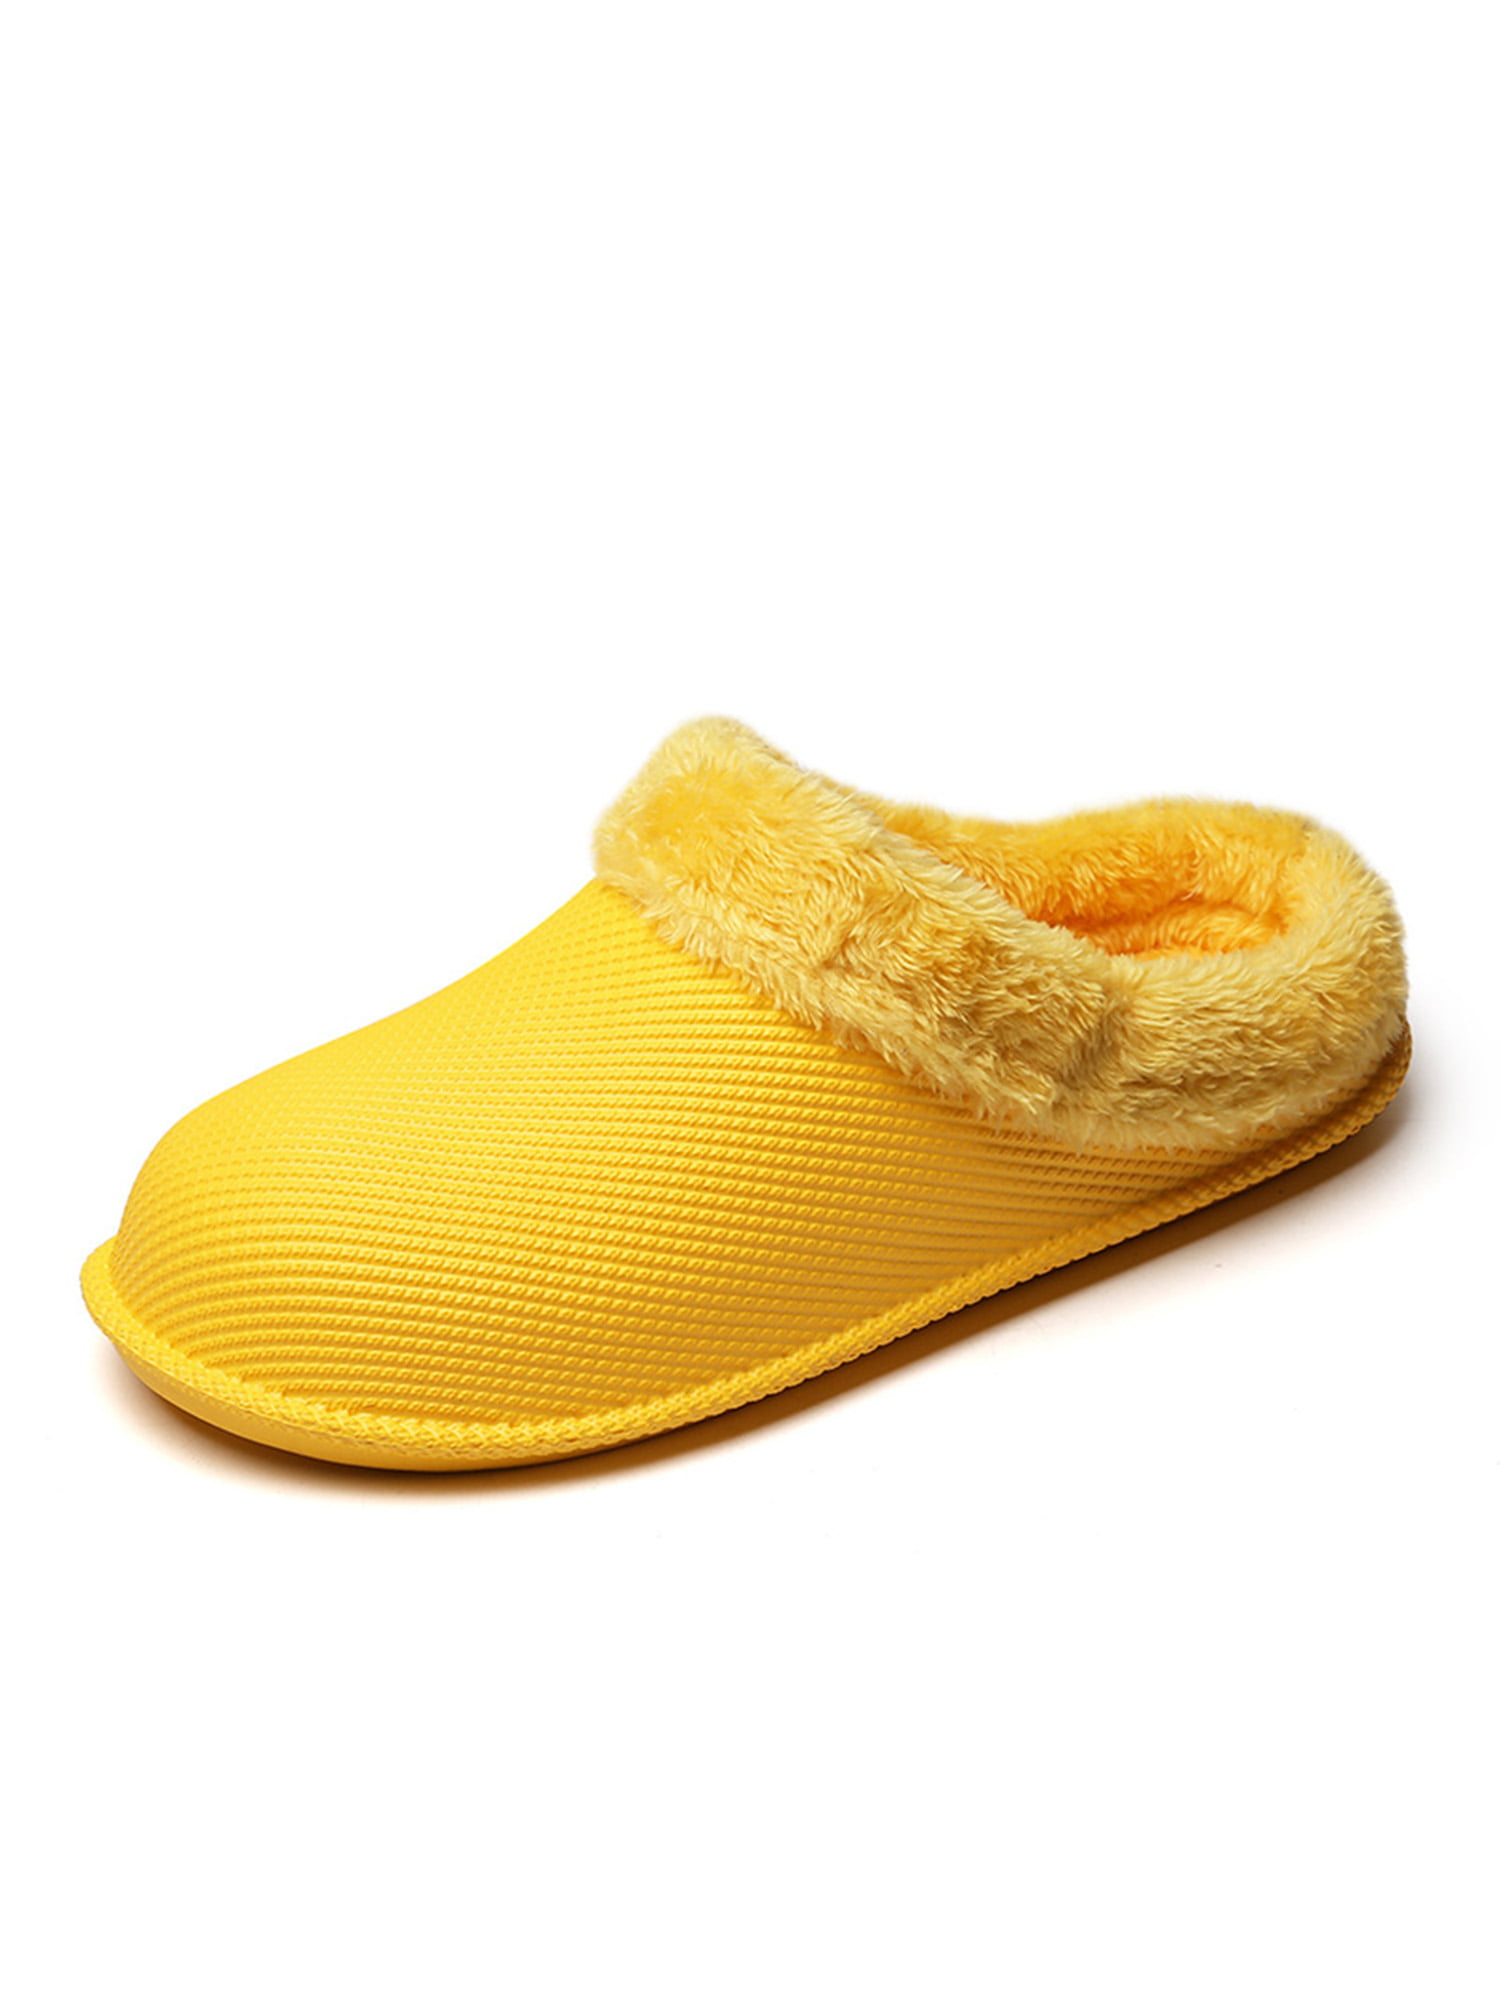 Women's Men's Slippers Lined Clogs Warm And Comfortable House Plush Lined Non-Slip Indoor Memory Foam Slippers，Fuzzy Garden Ladies Waterproof Slippers 